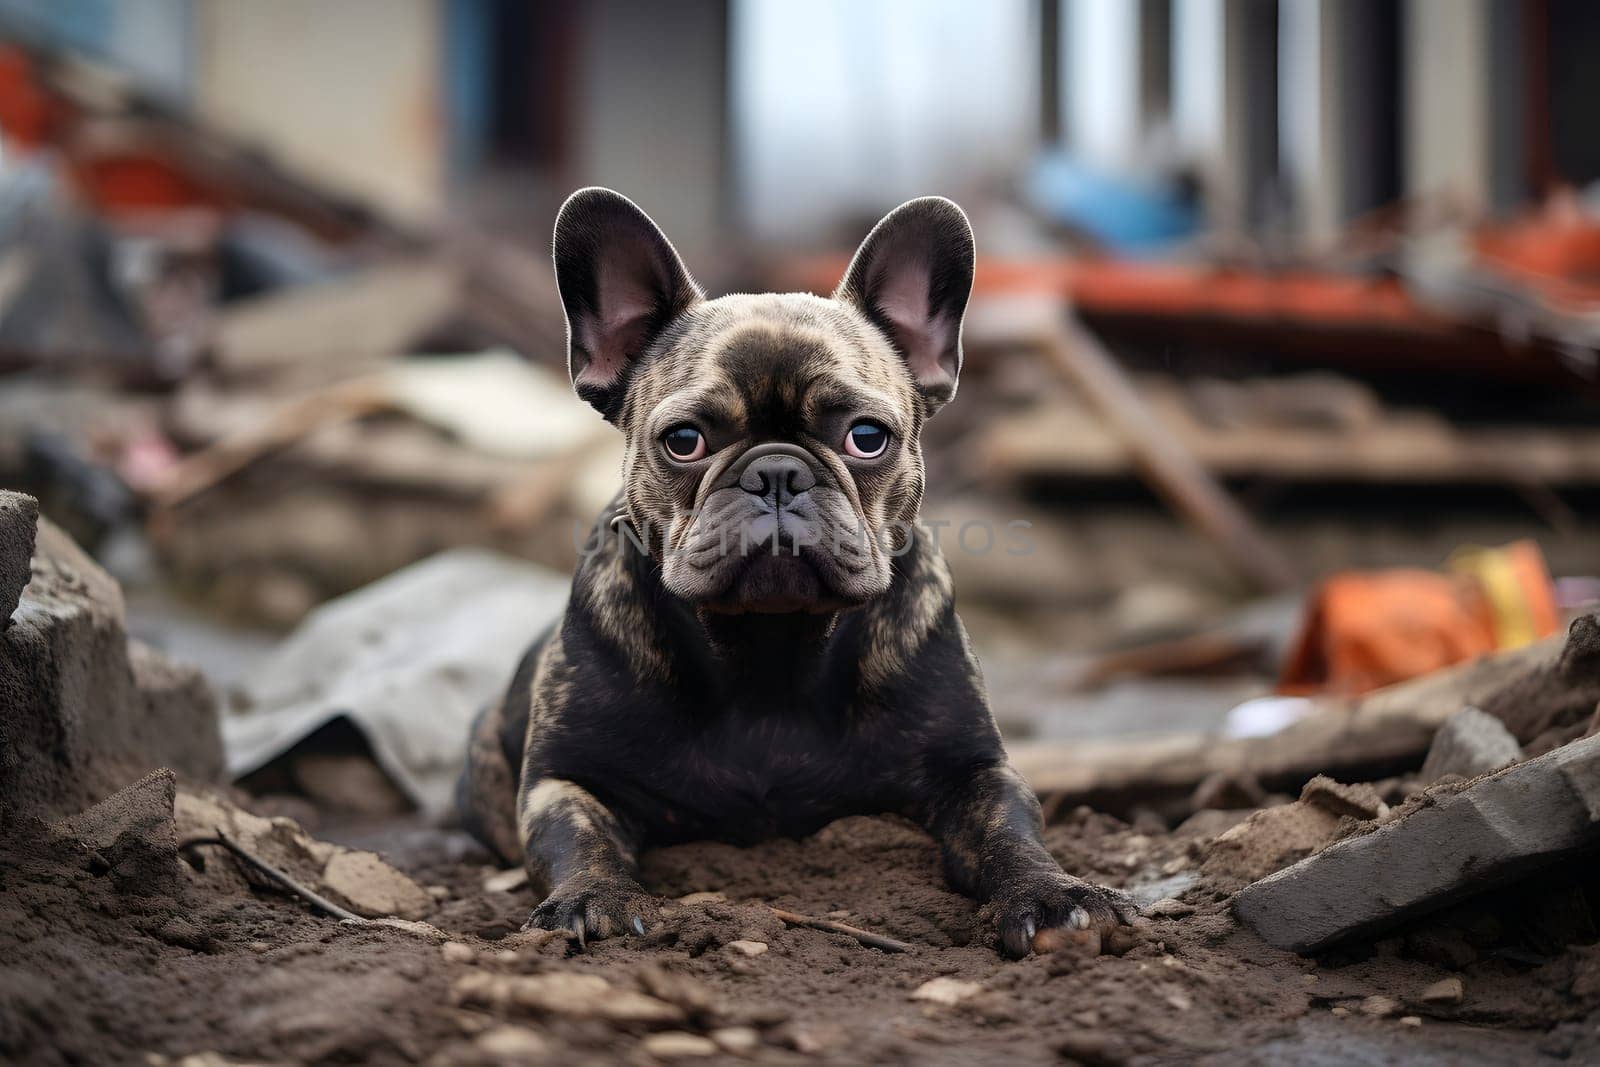 Alone and hungry French Bulldog after disaster on the background of house rubble. Neural network generated image. Not based on any actual scene.